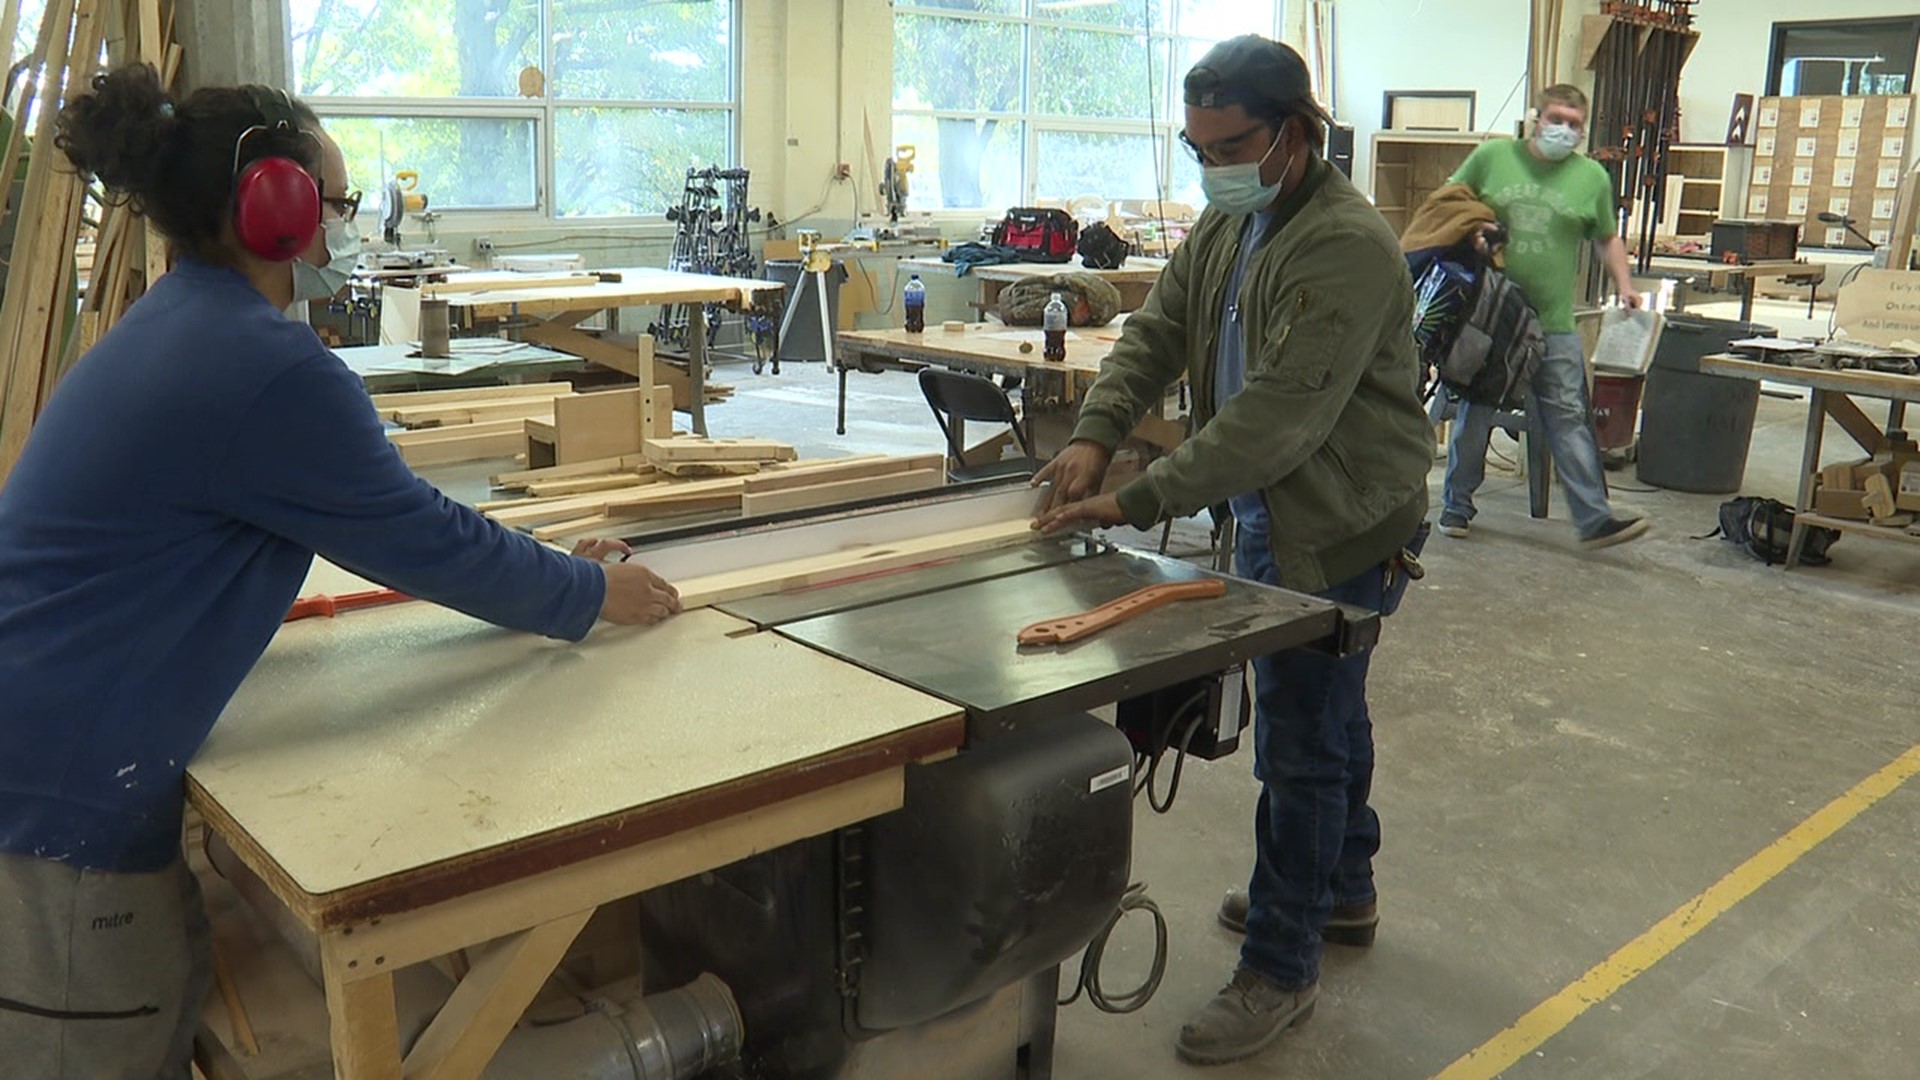 Students at Johnson College in Scranton are refining their skills, and soon, they'll be using what they've learned to build for the greater good.